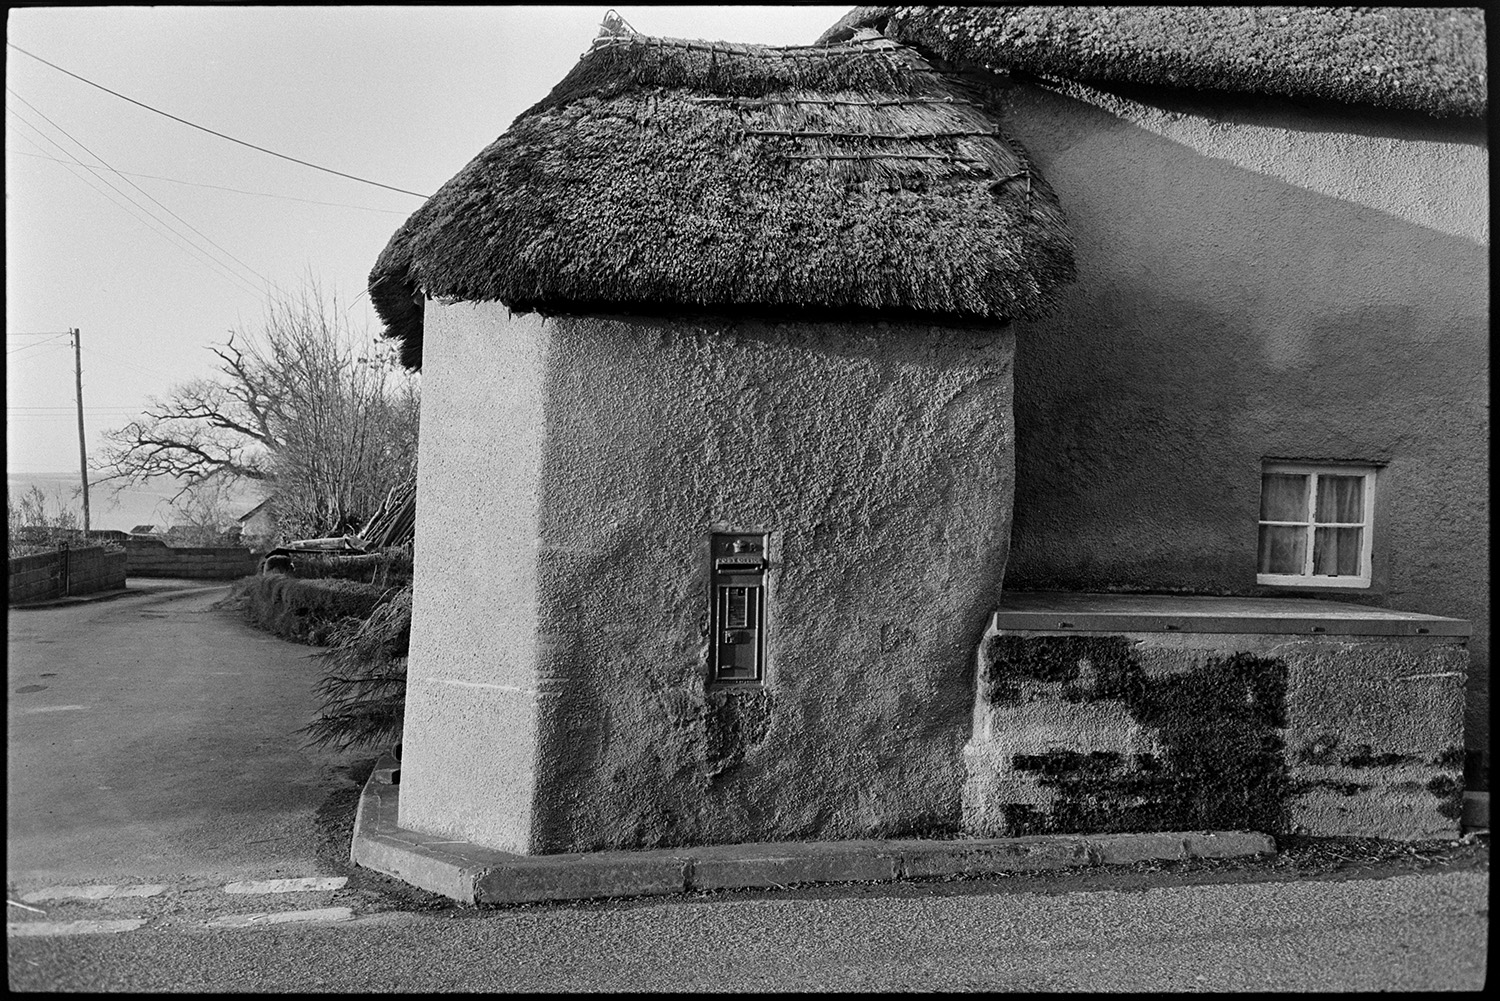 Postman emptying letterbox post, van parked, thatched cottage. 
[A post box set into the wall of a cob and thatch cottage at Moor End, Burrington.]